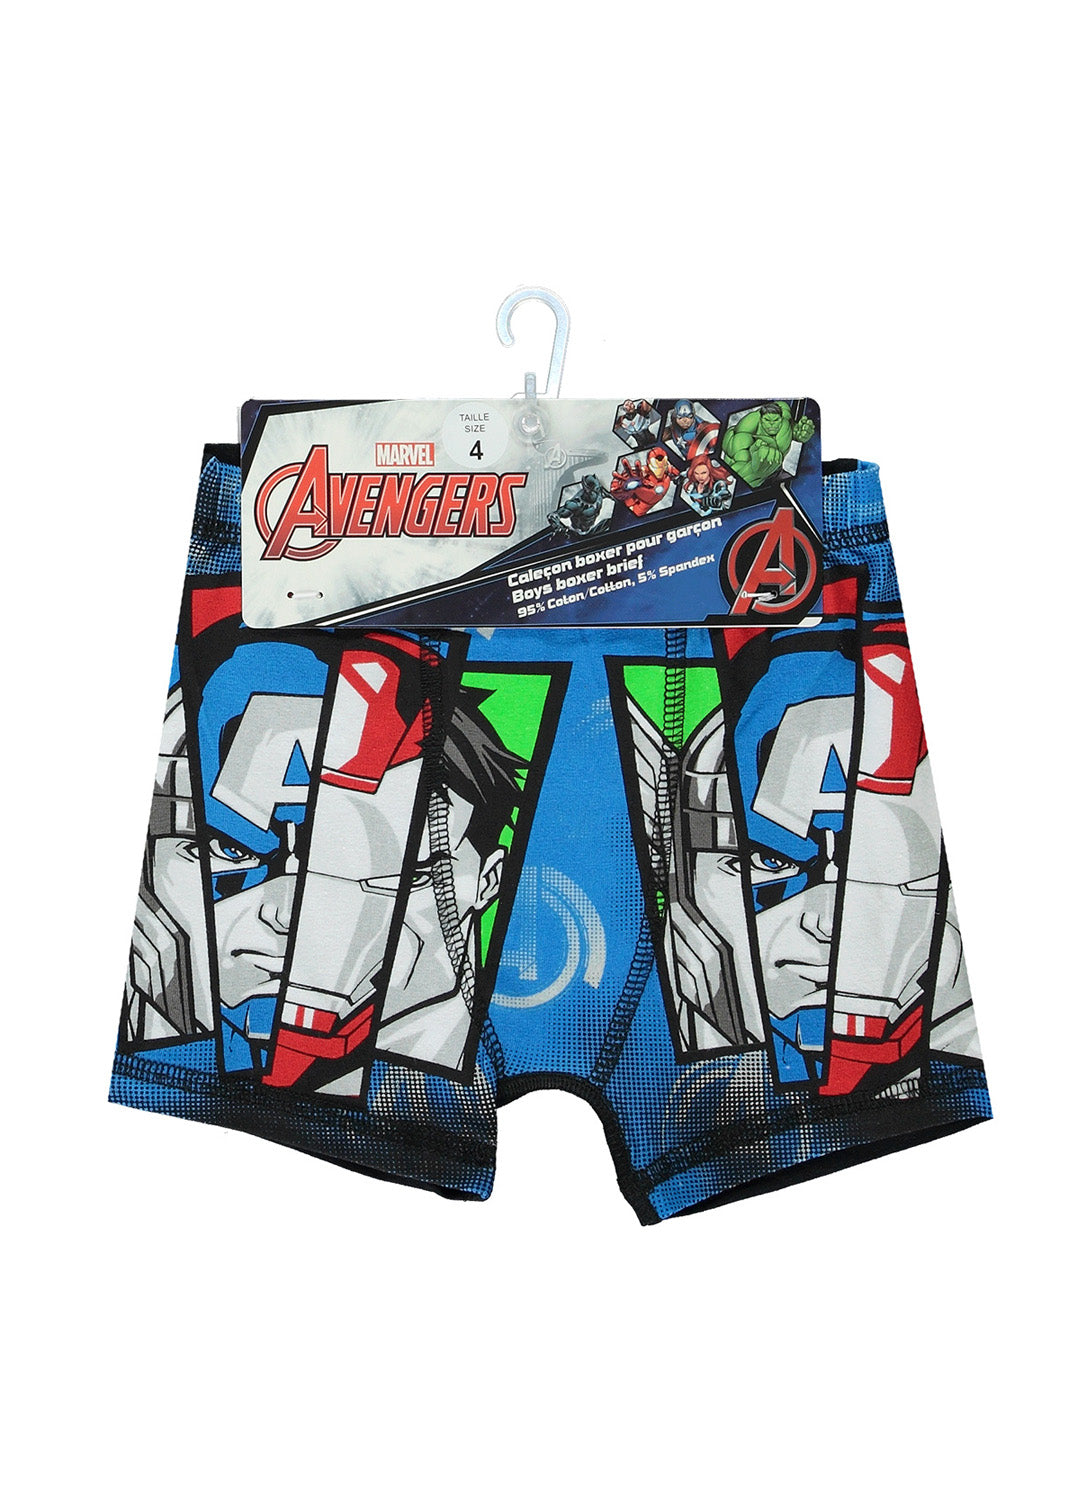 Boys trunk a colorful design of several Avengers characters